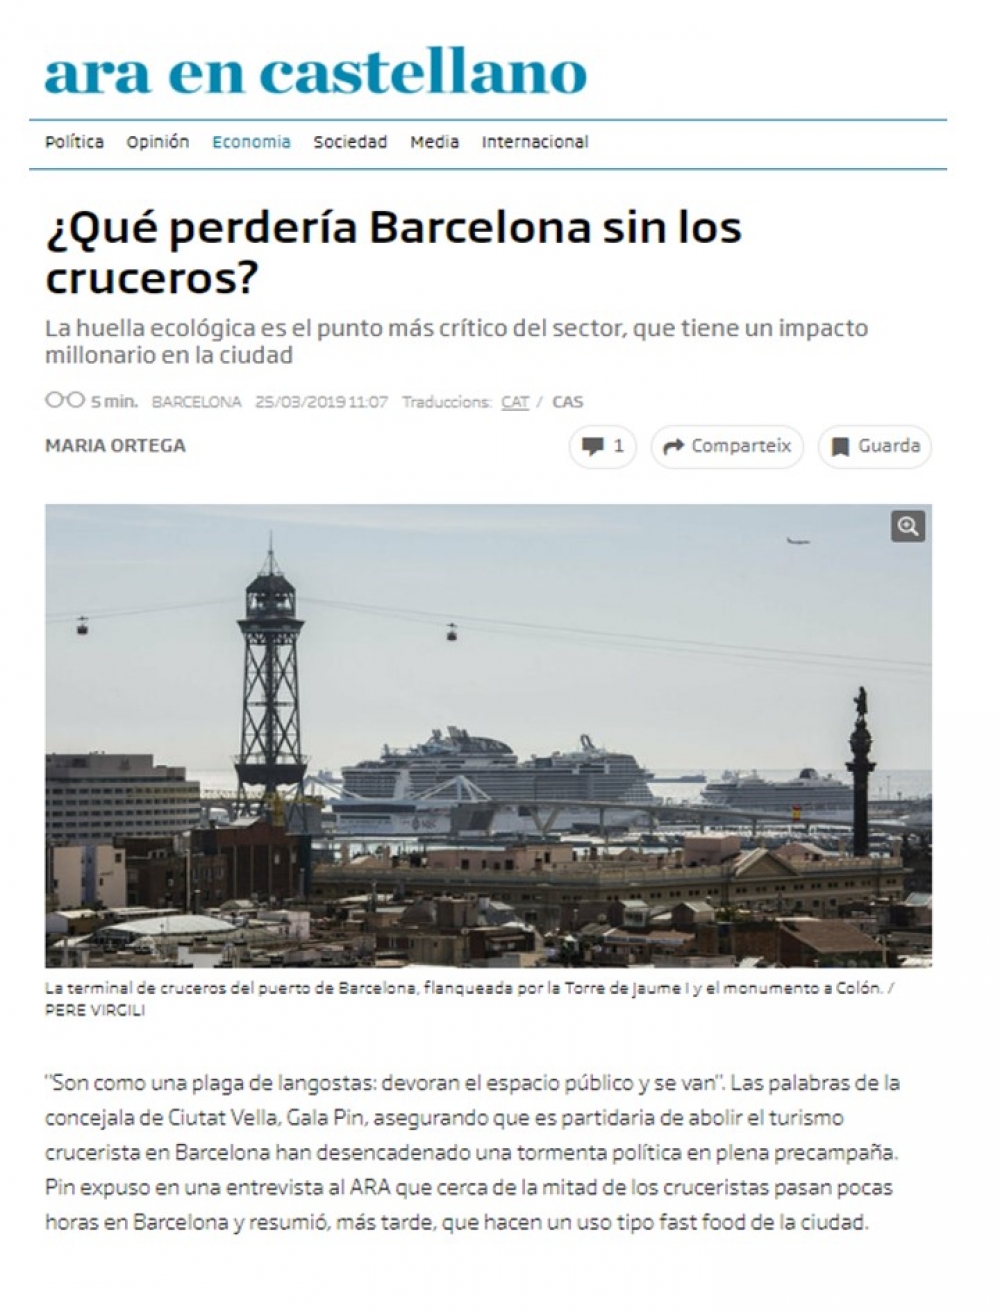 What would Barcelona lose without the cruises?